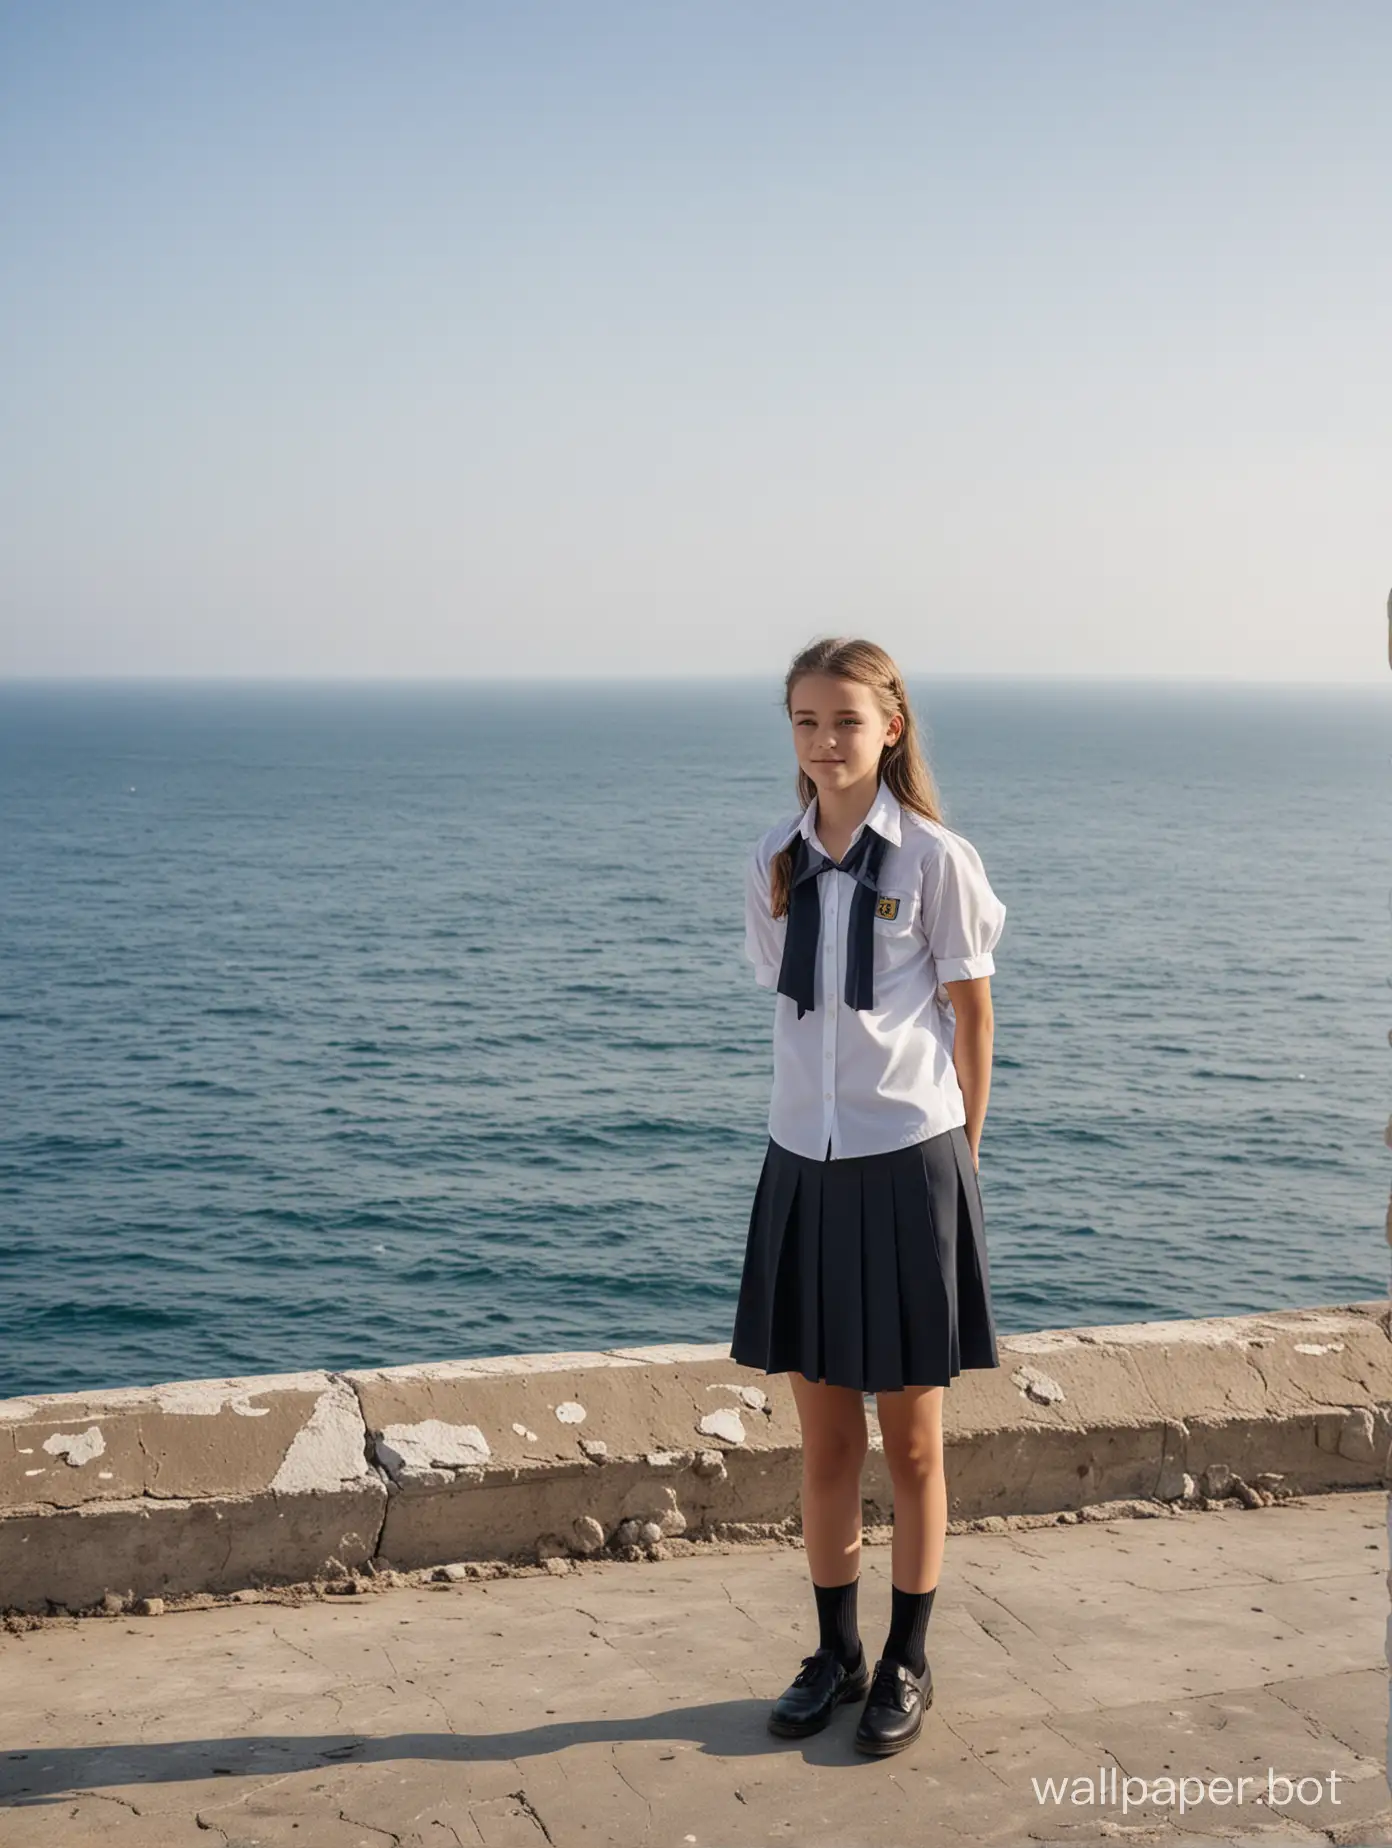 11-year-old girl, Crimea, full height, school uniform, view of the sea, ship in the distance